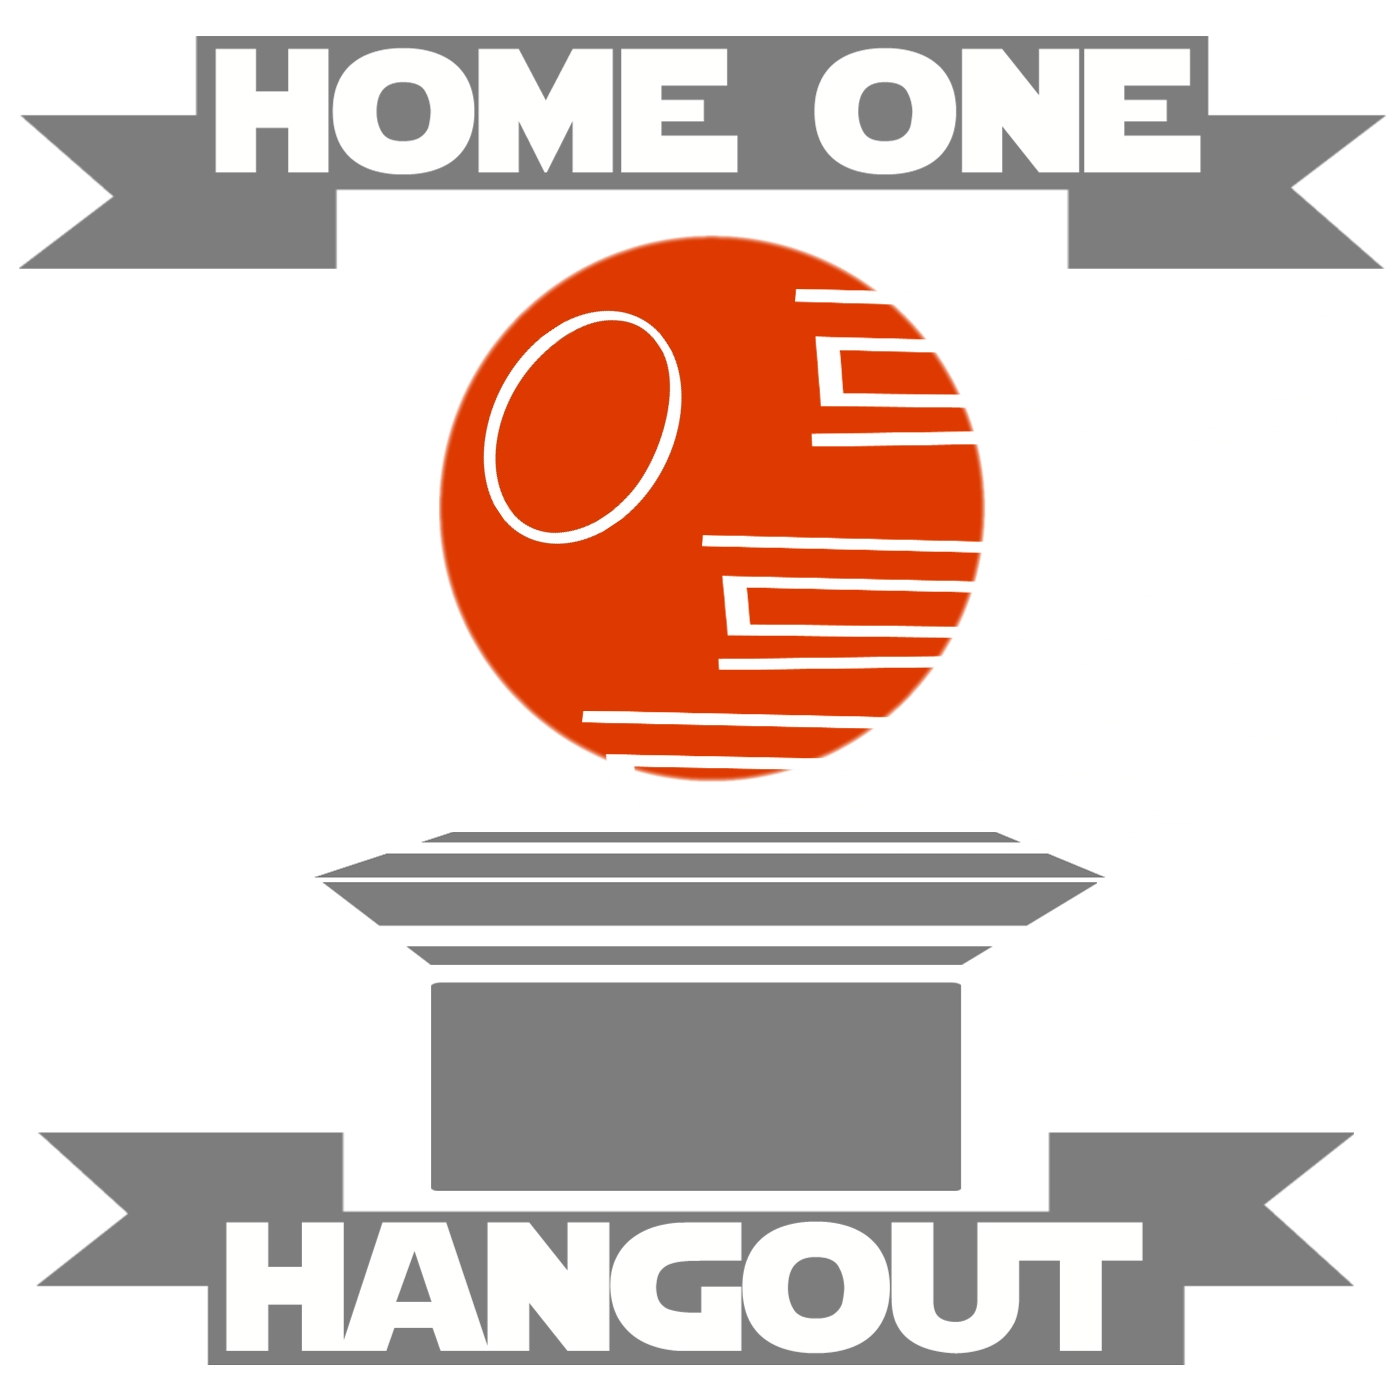 Home One Hangout #17: New Animation Please?